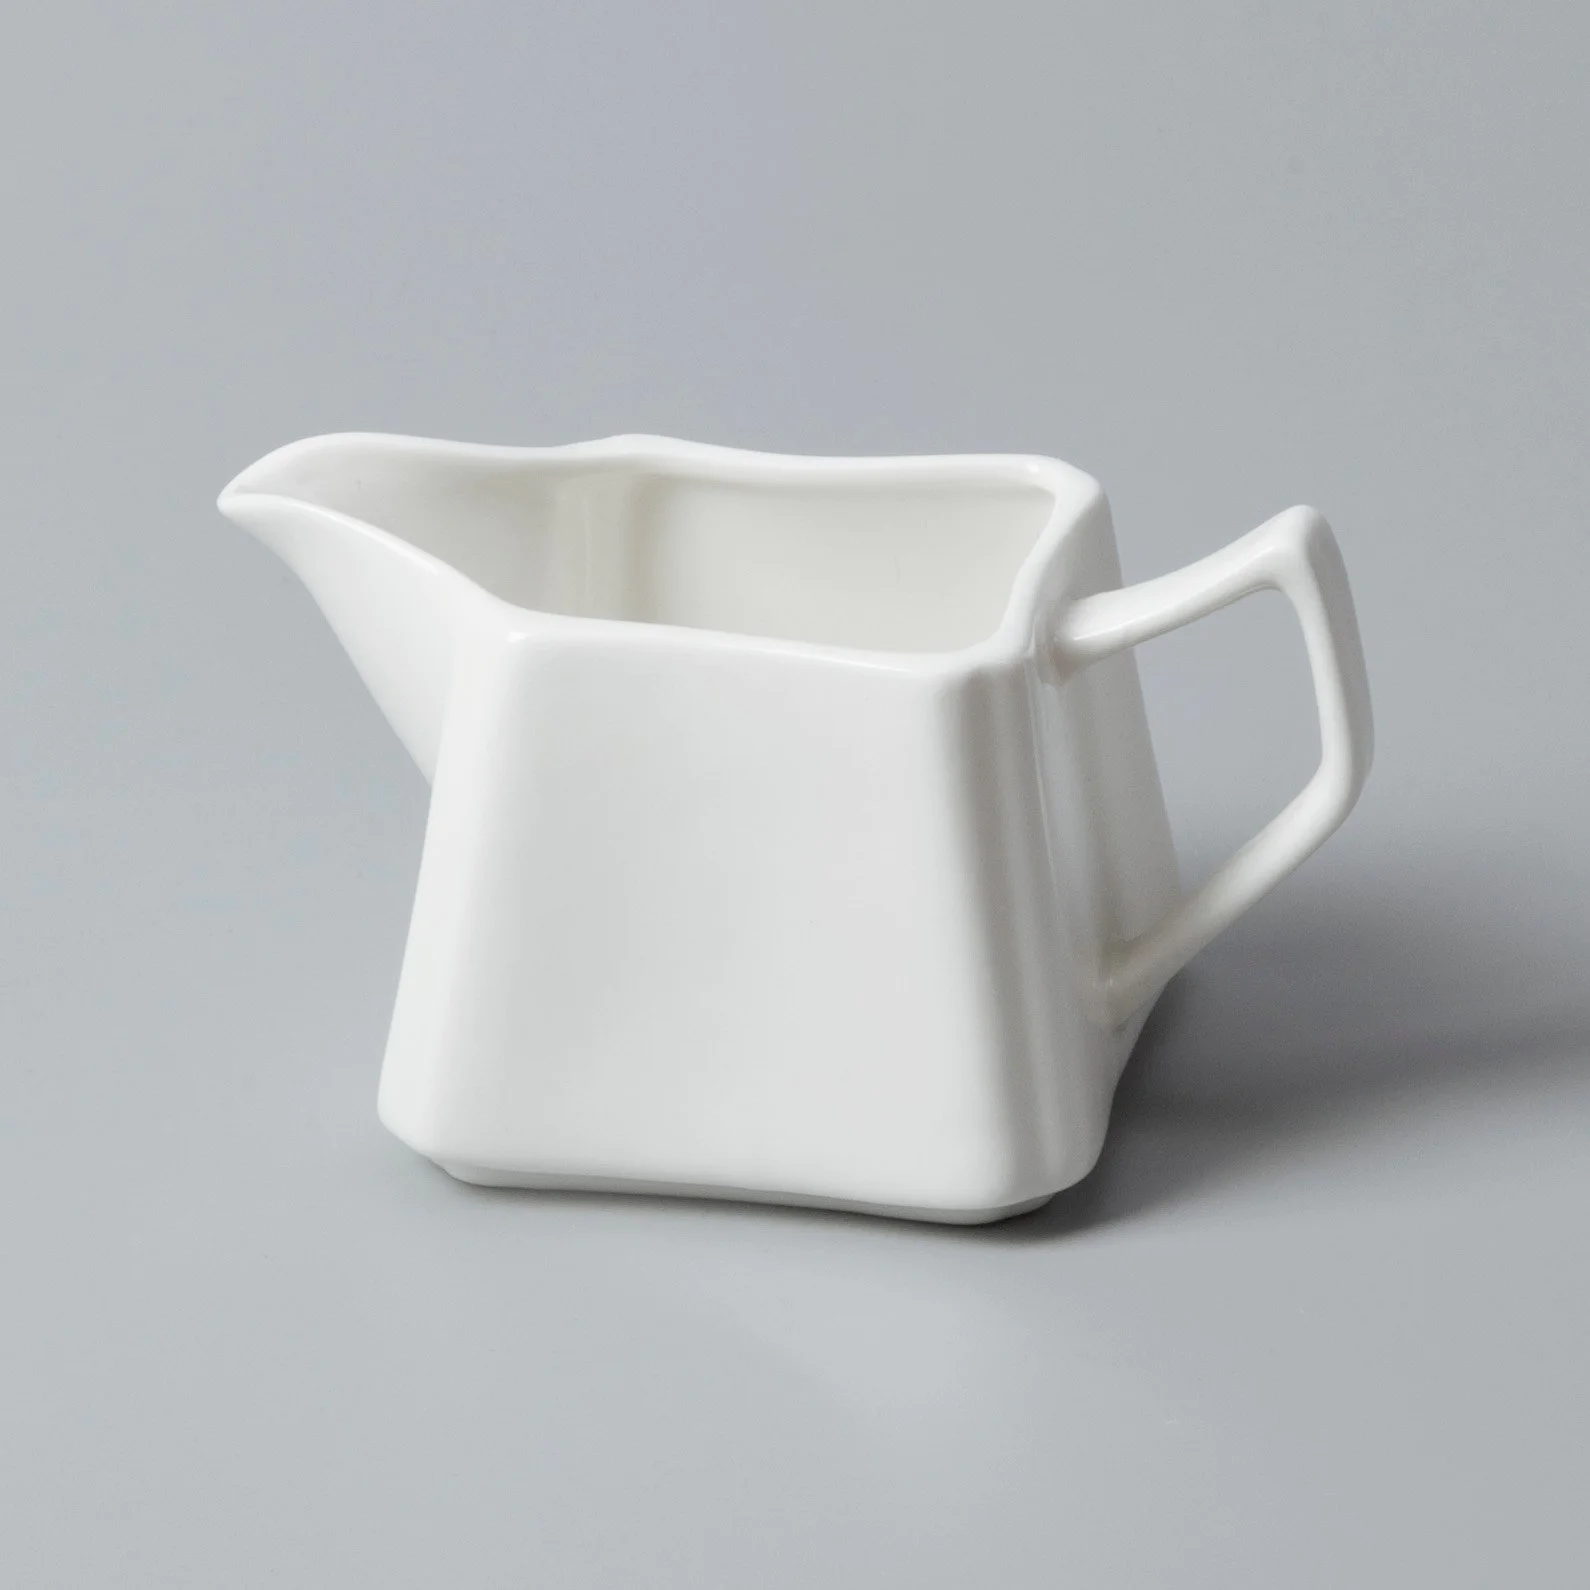 white porcelain tableware white two eight ceramics fang company